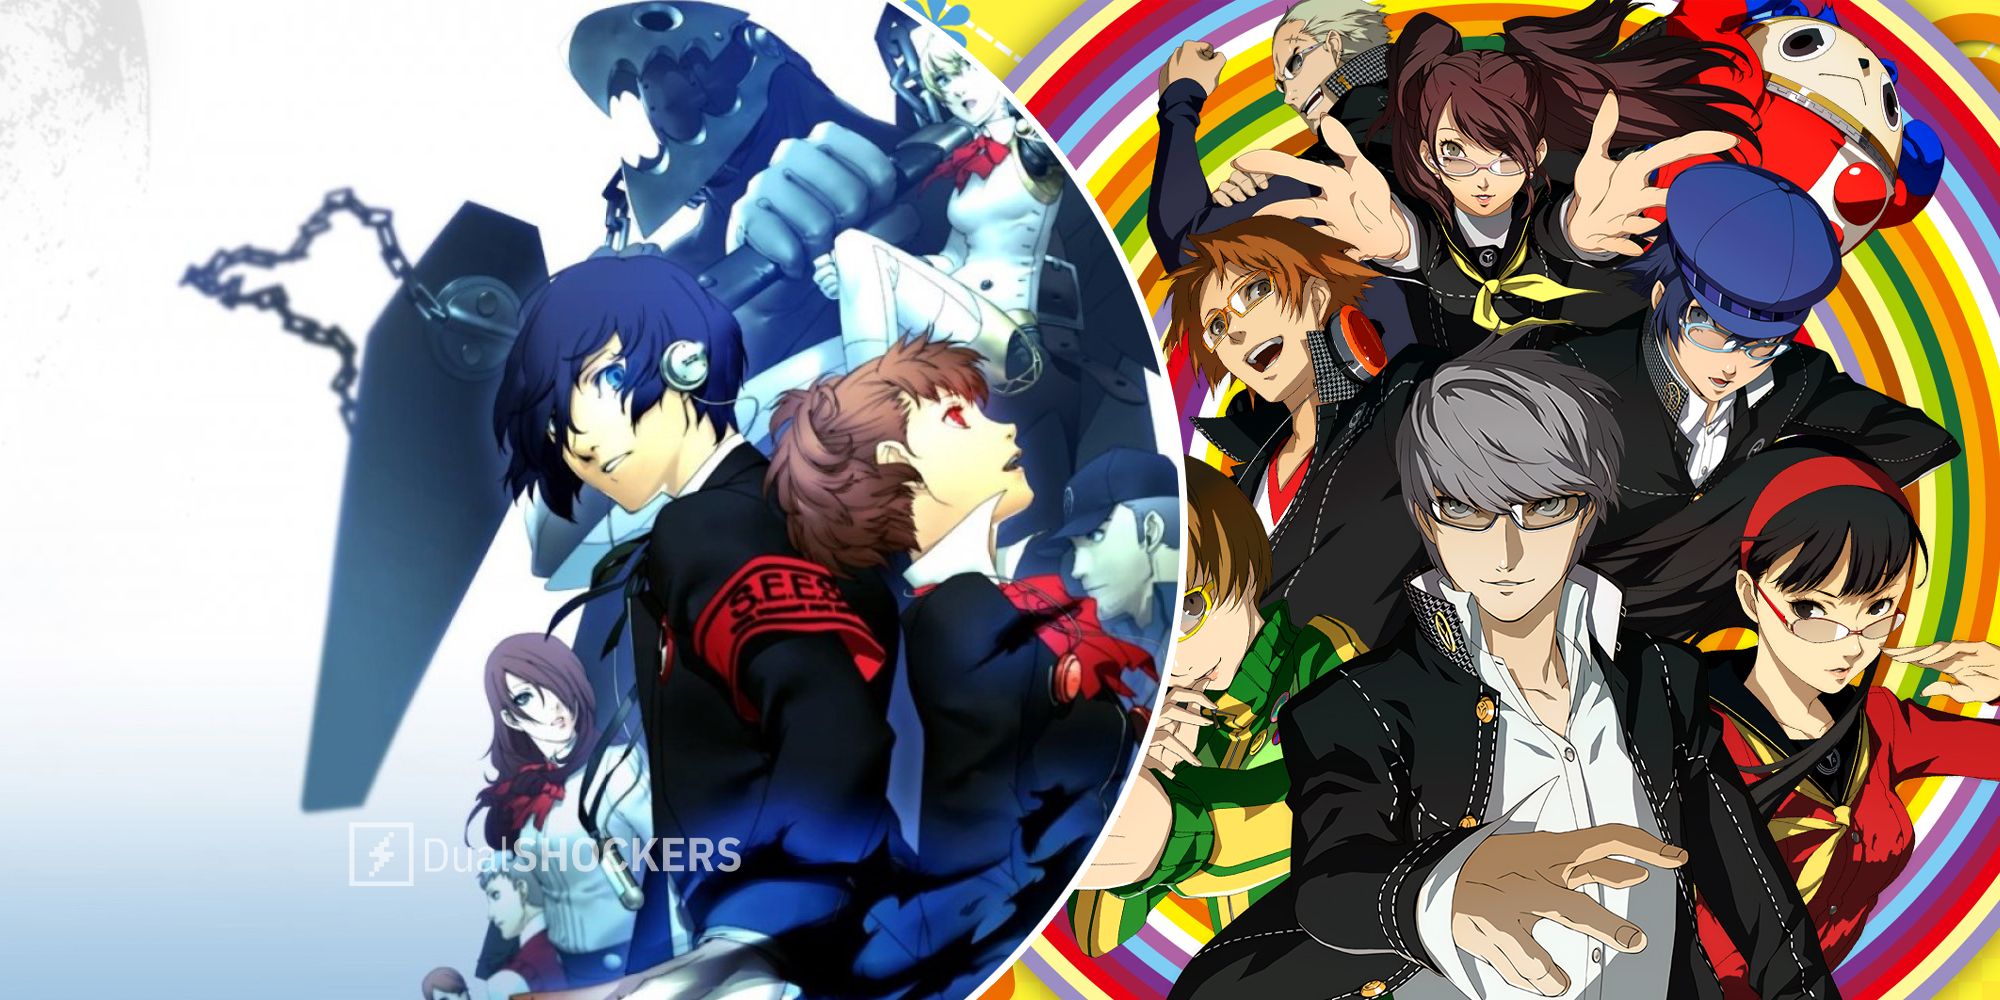 Persona 3 Portable And Persona 4 Golden Come To Consoles In January 2023